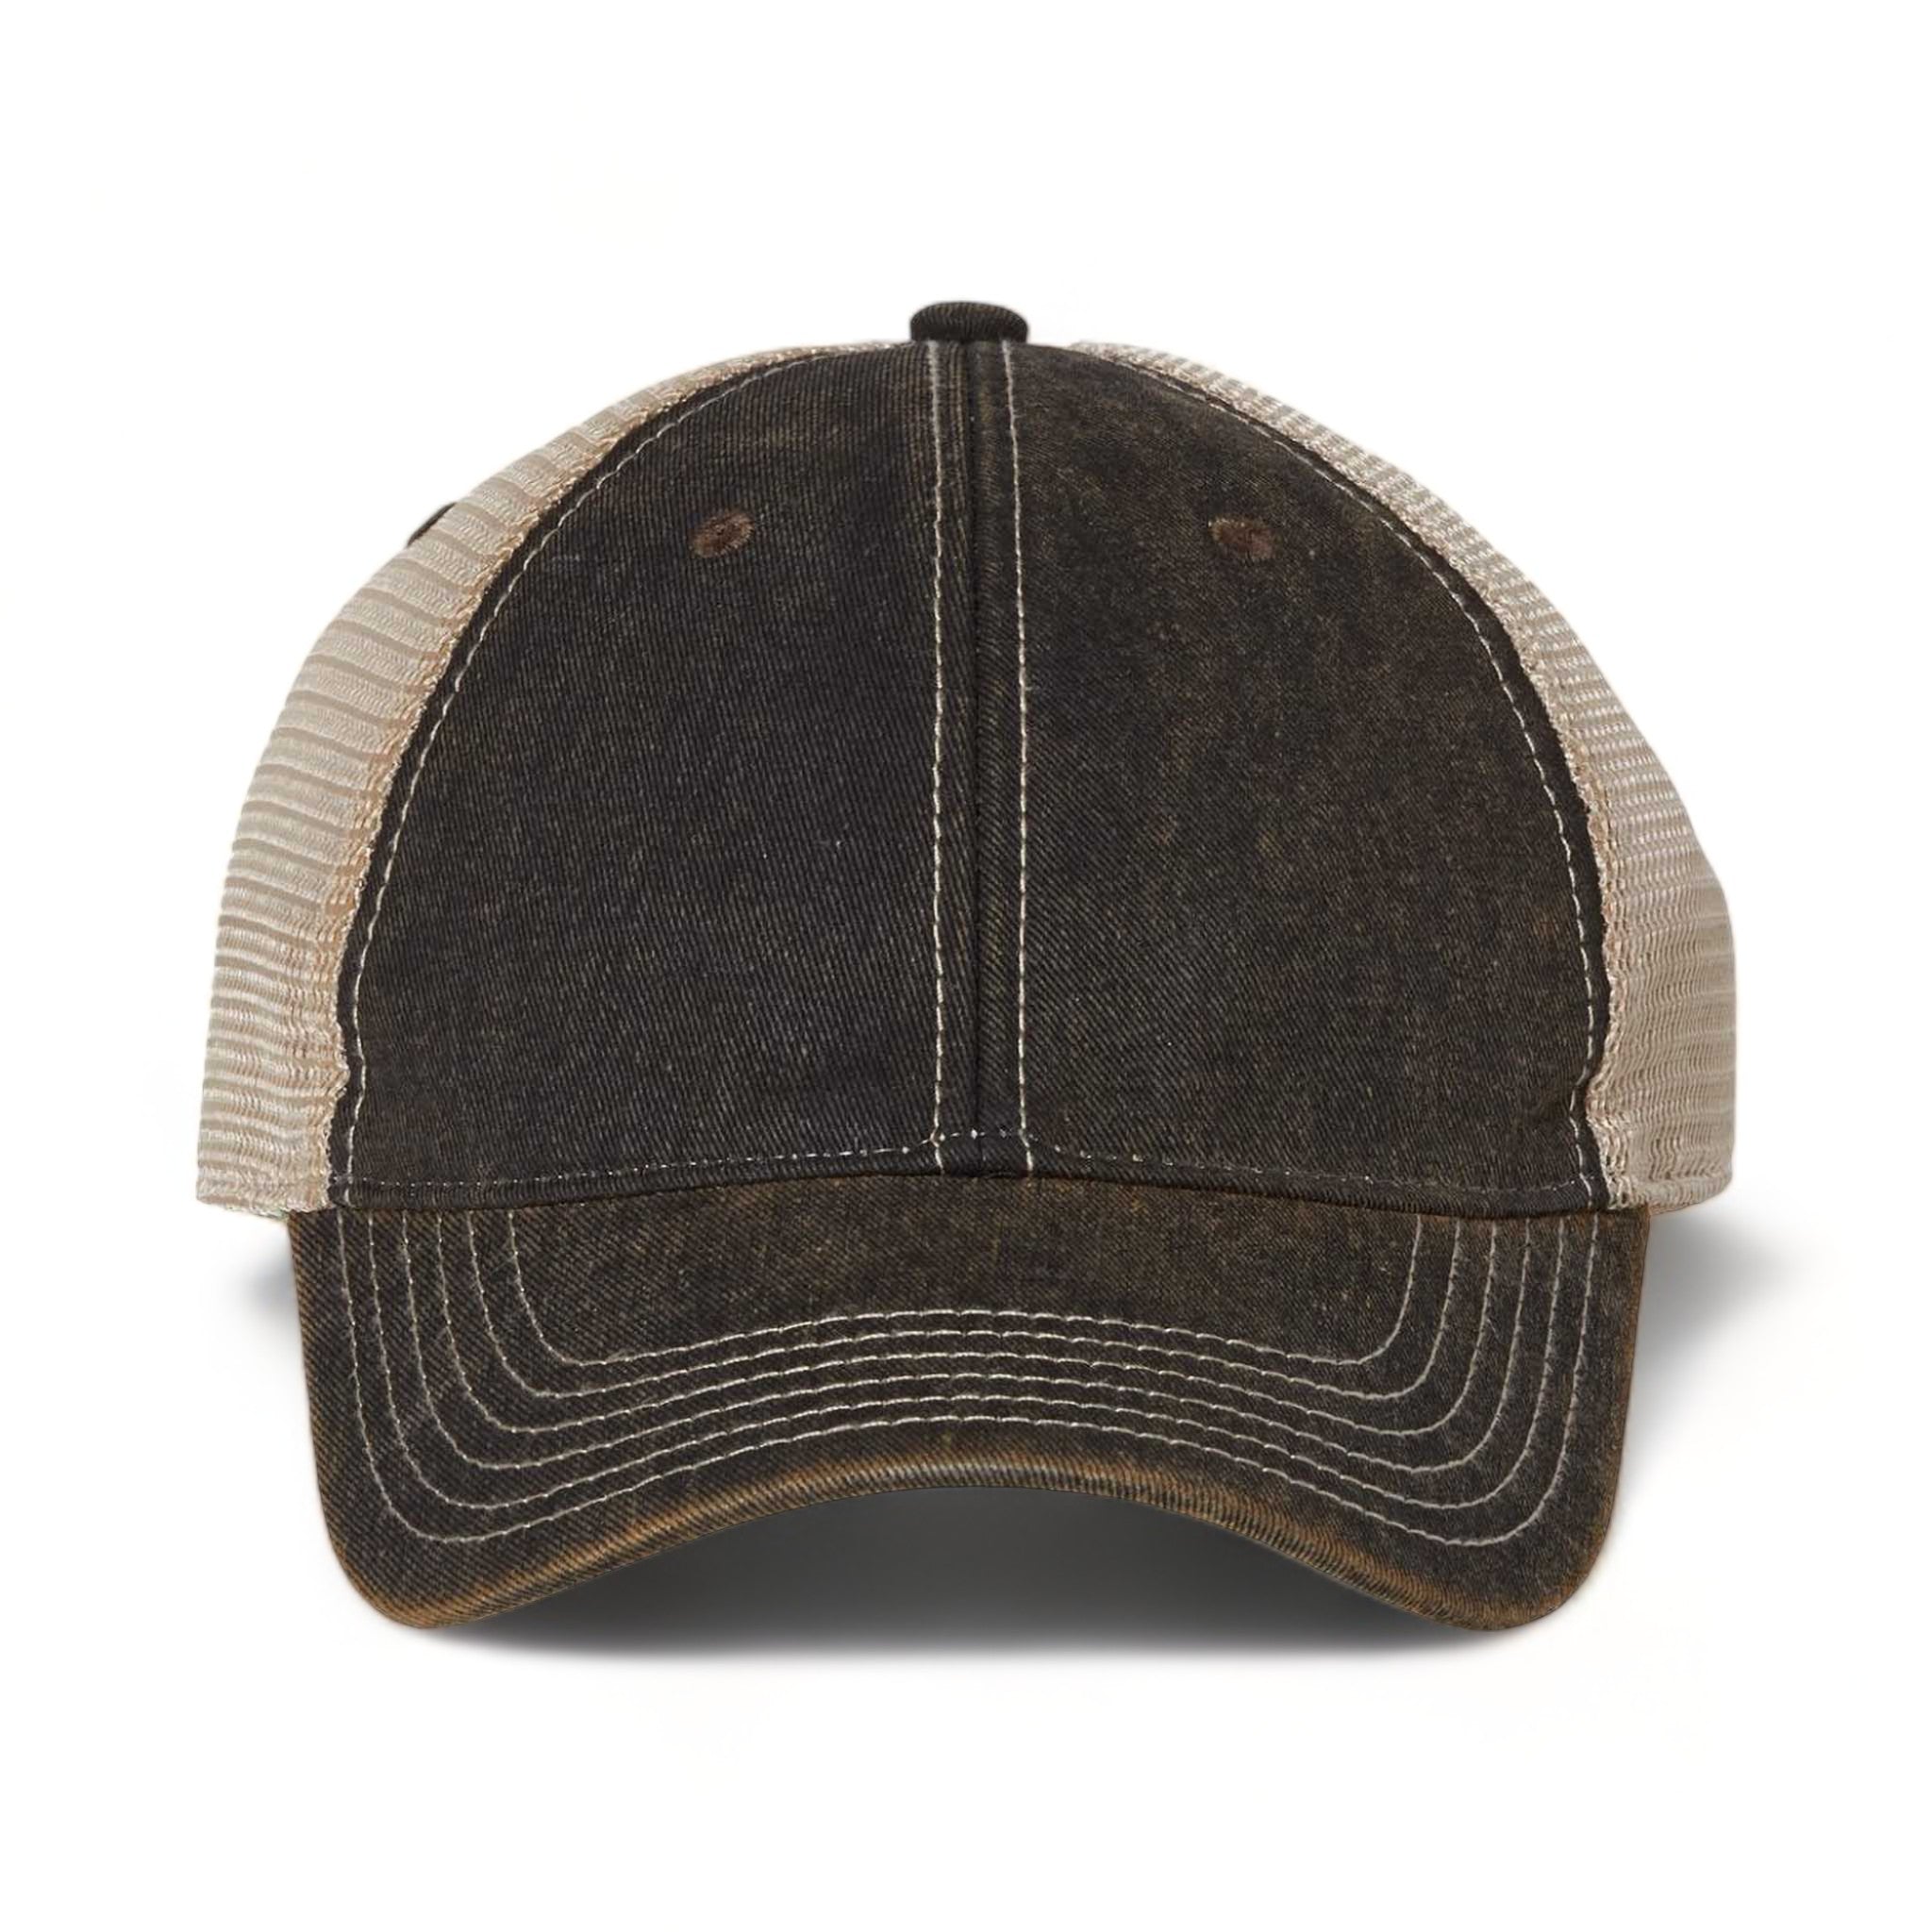 Front view of LEGACY OFA custom hat in black and khaki